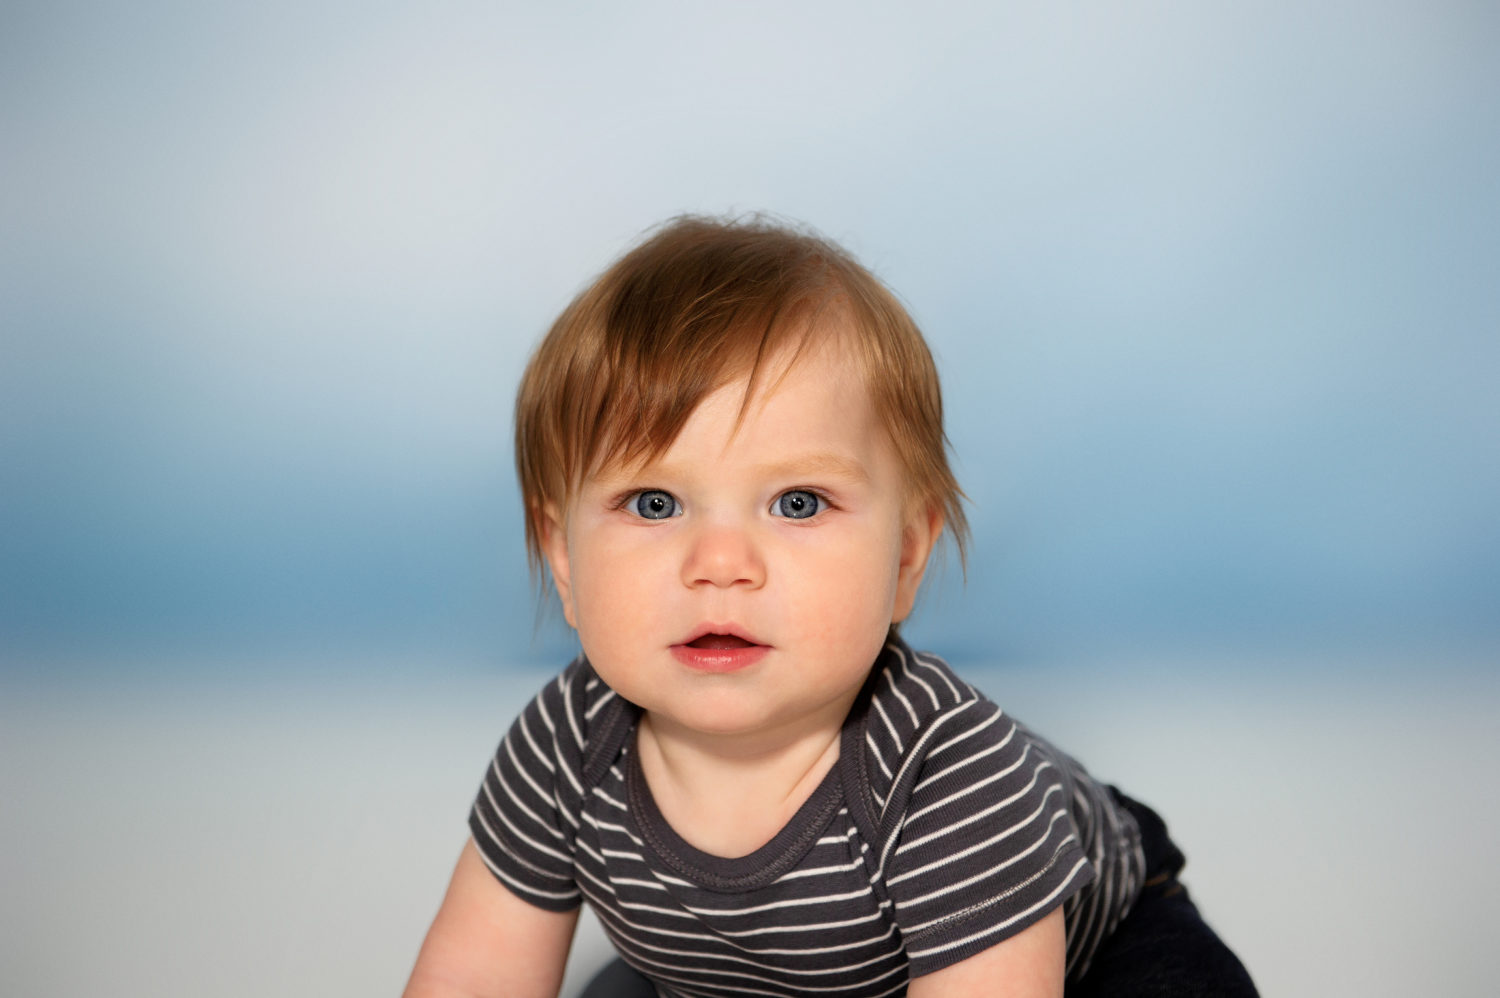 children's photography ages 6 months+